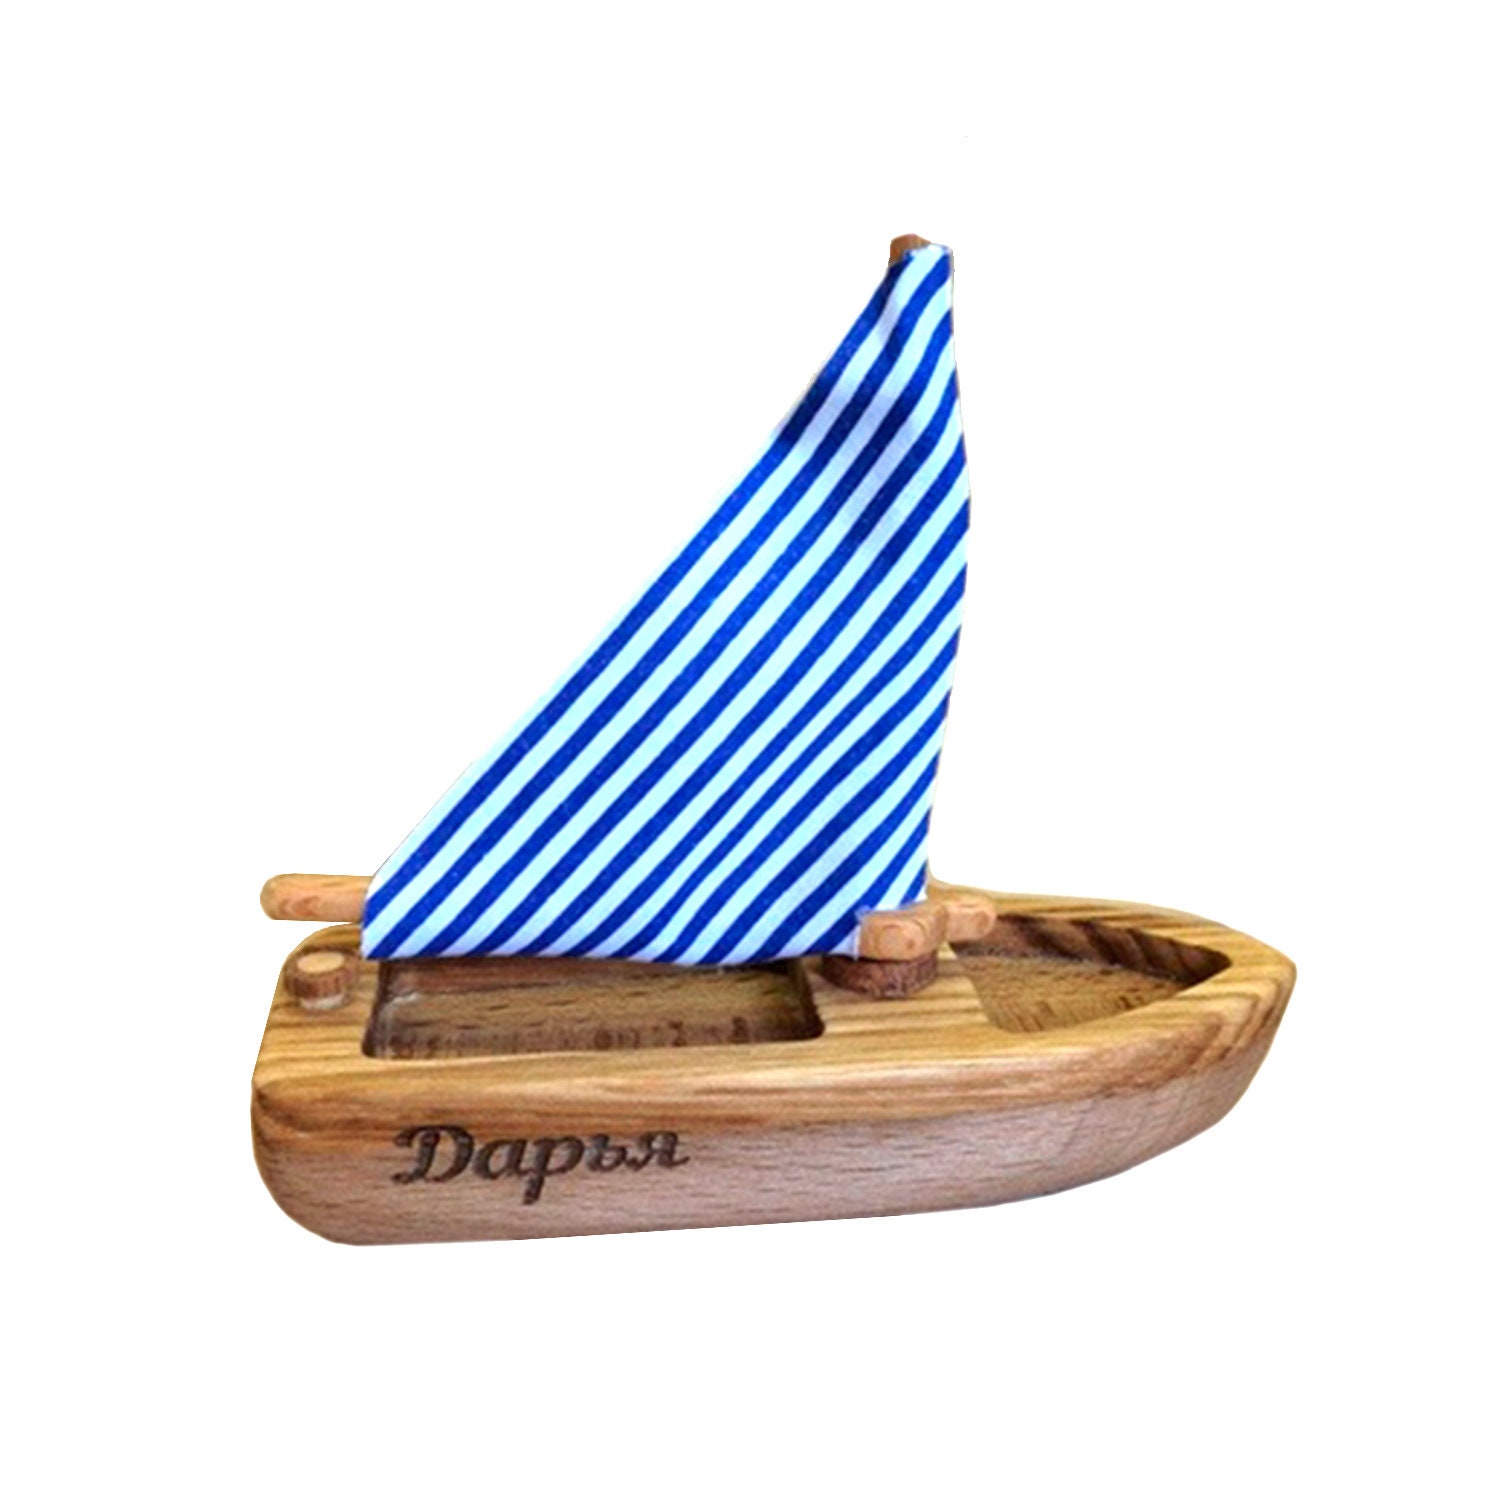 toy sailboat for pool